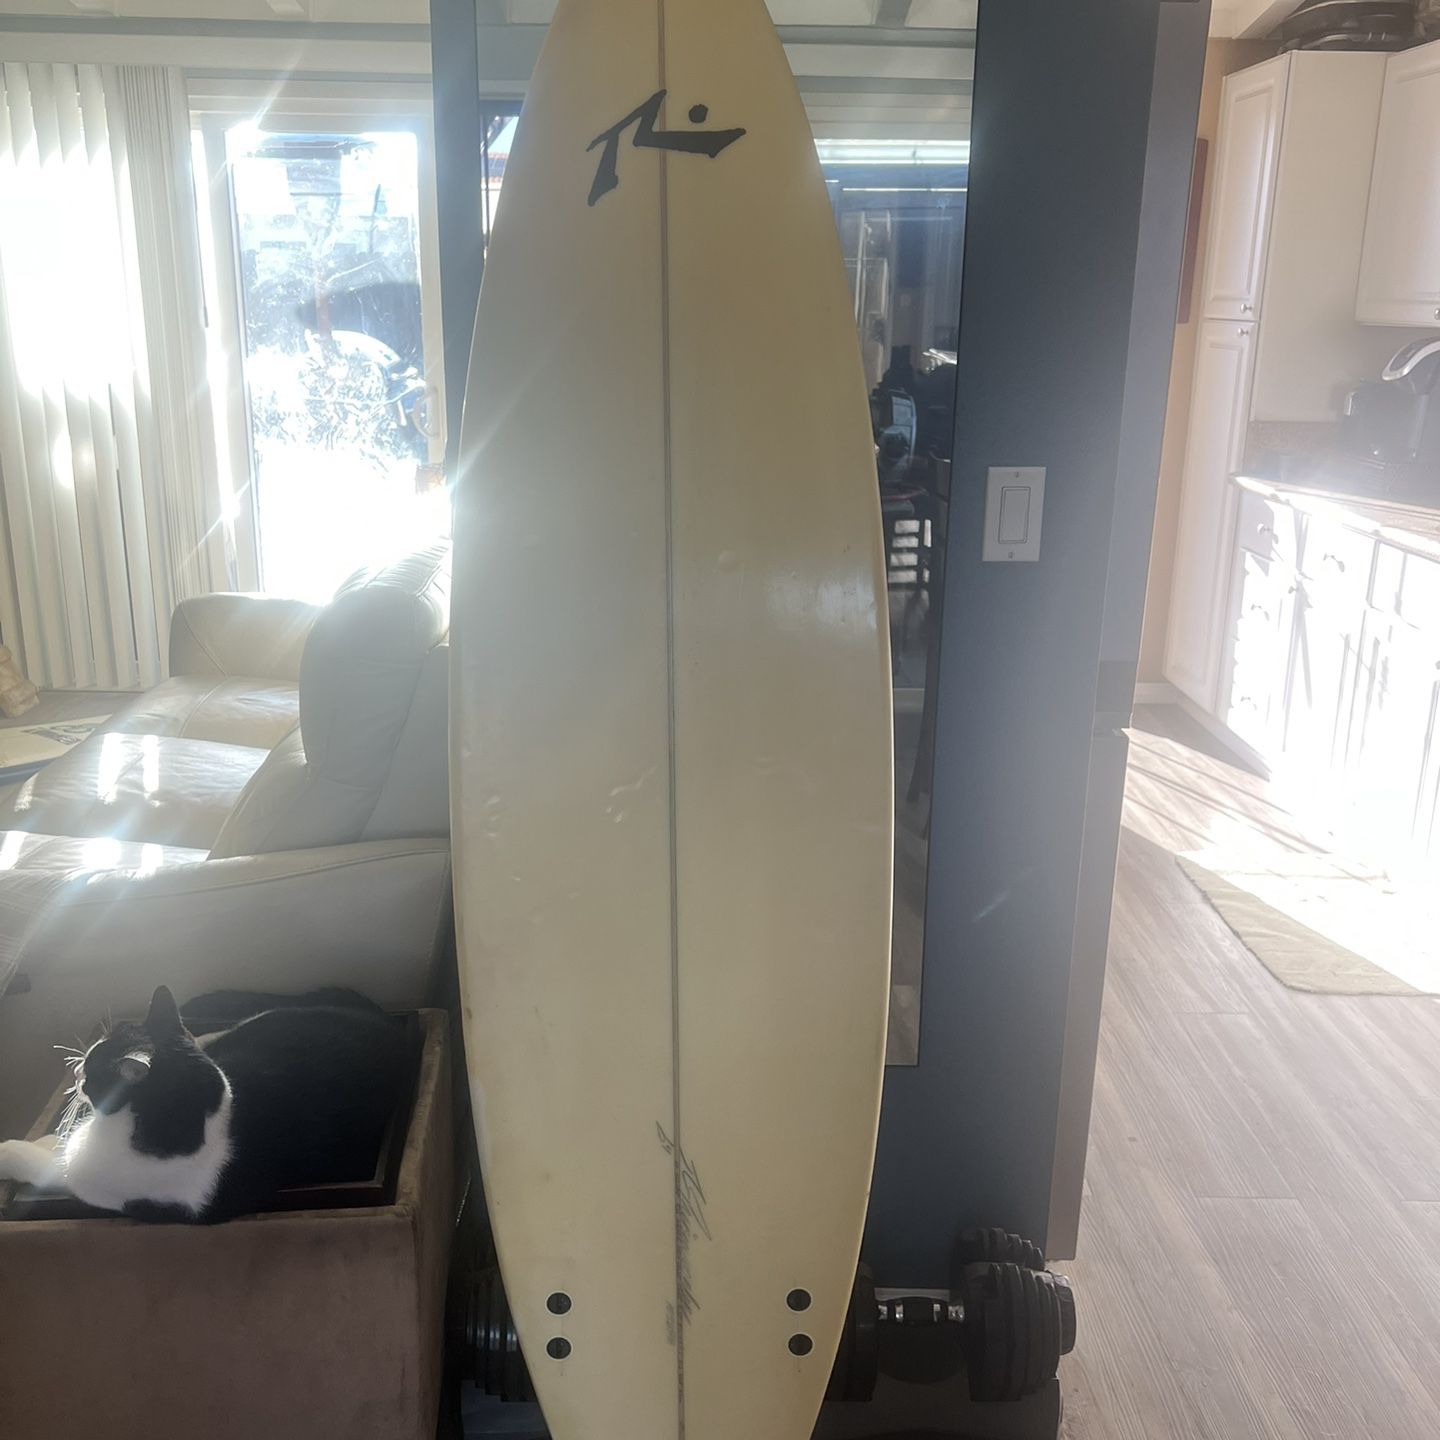 Rusty squash tail surfboard 6’4” FCS with OAM Kick pad. great condition!